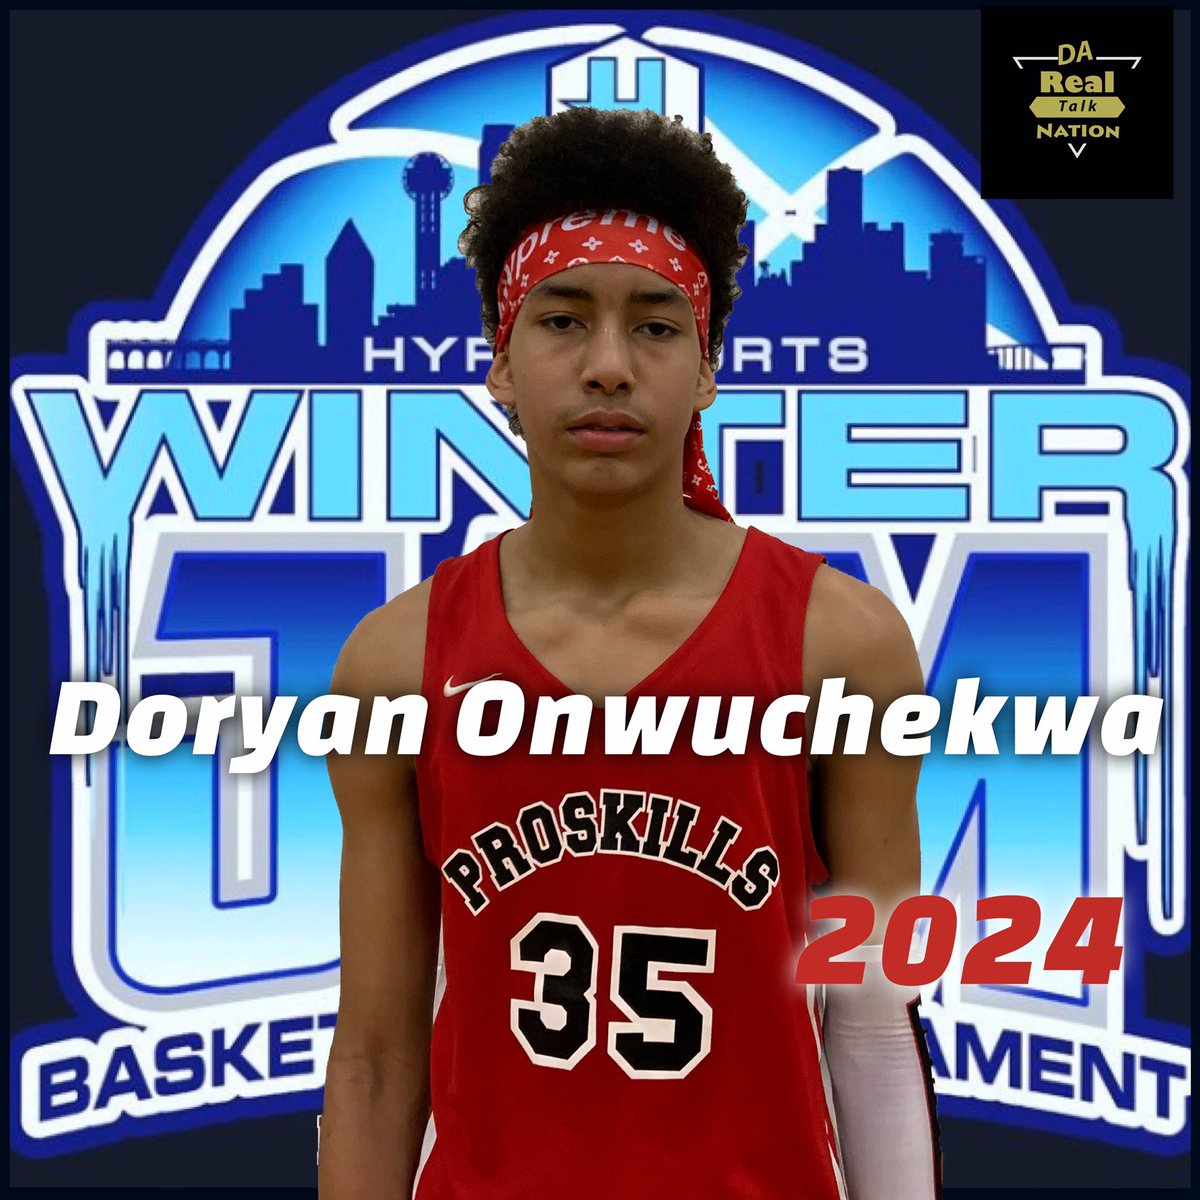 @hypesports #WinterJam2020 had plenty of LENGTH in the 8th a grade Division: @pro_2024 6’7 post DORYAN ONWUCHEKWA is still a work in progress but he rebounds well, alters opponent’s shots, soft touch on his shots! HIGH CEILING HERE #DaREALtalkNation